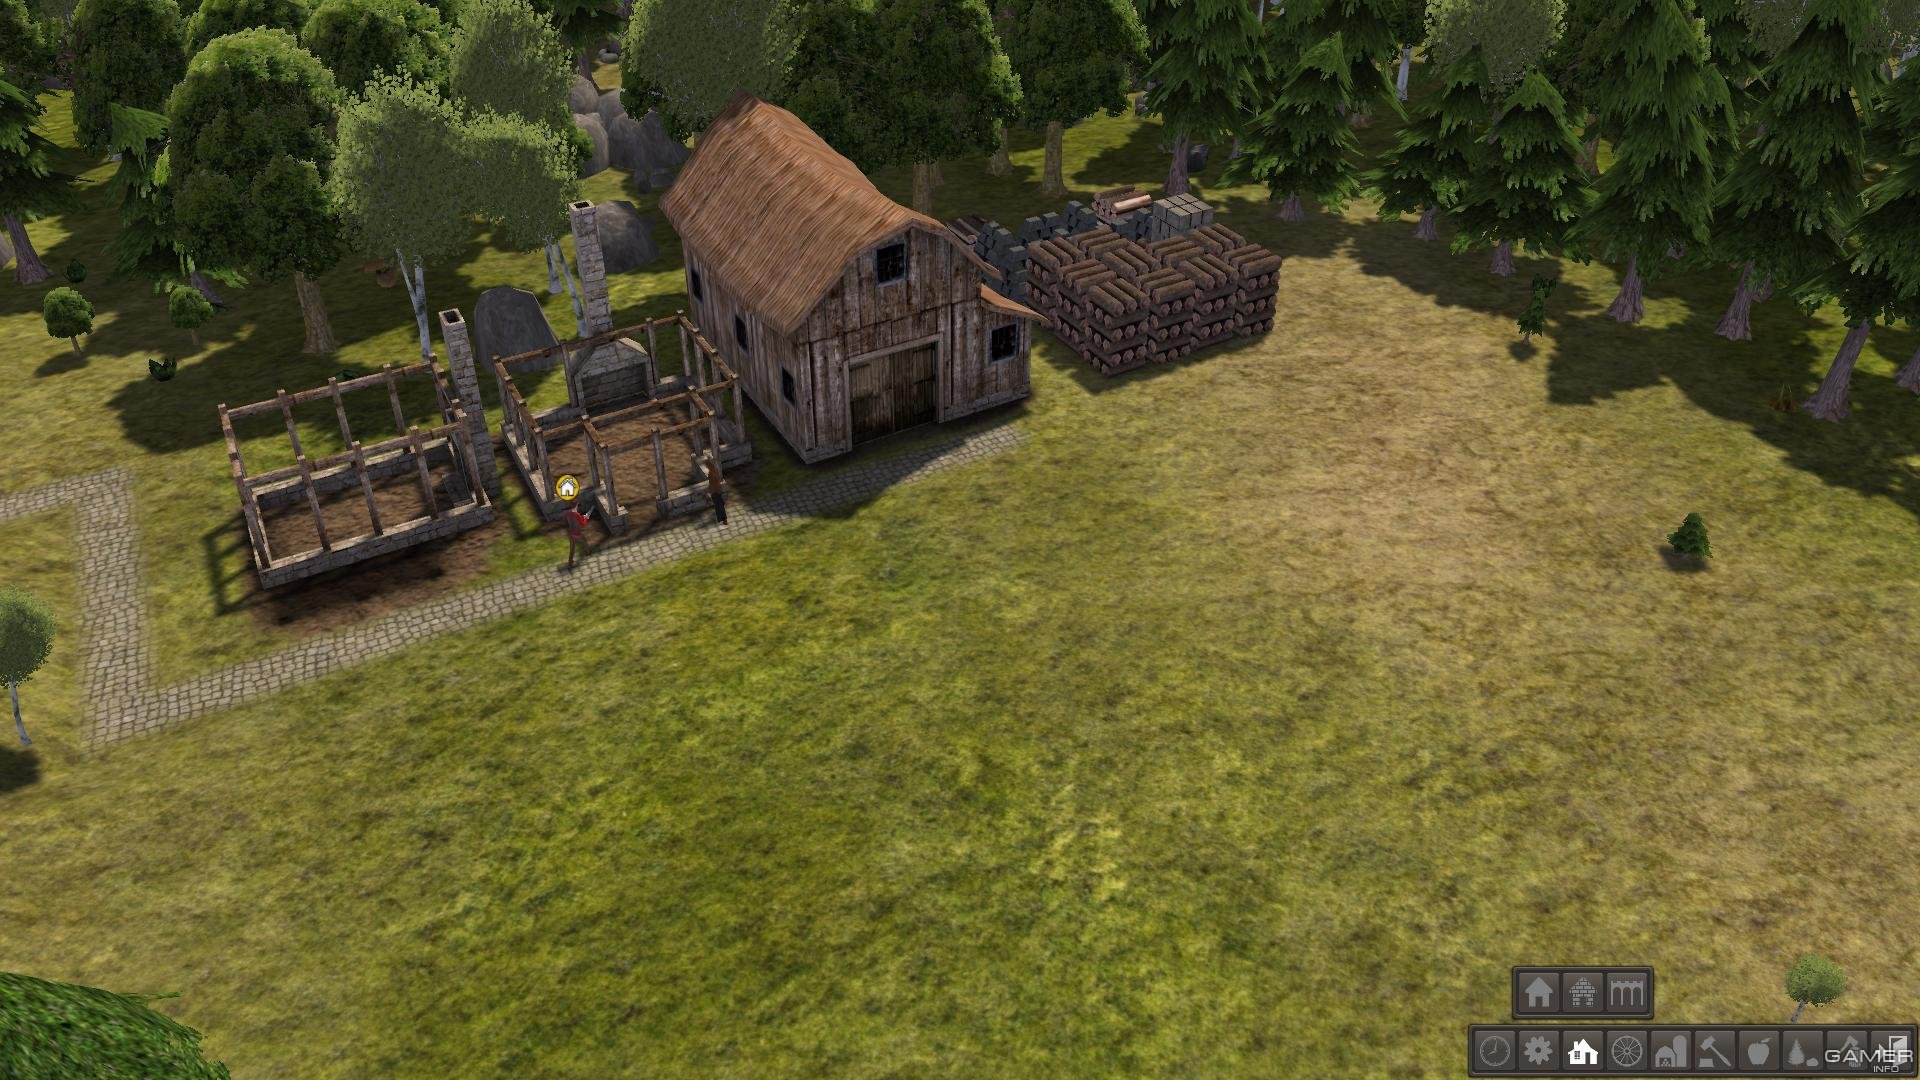 buy banished pc game